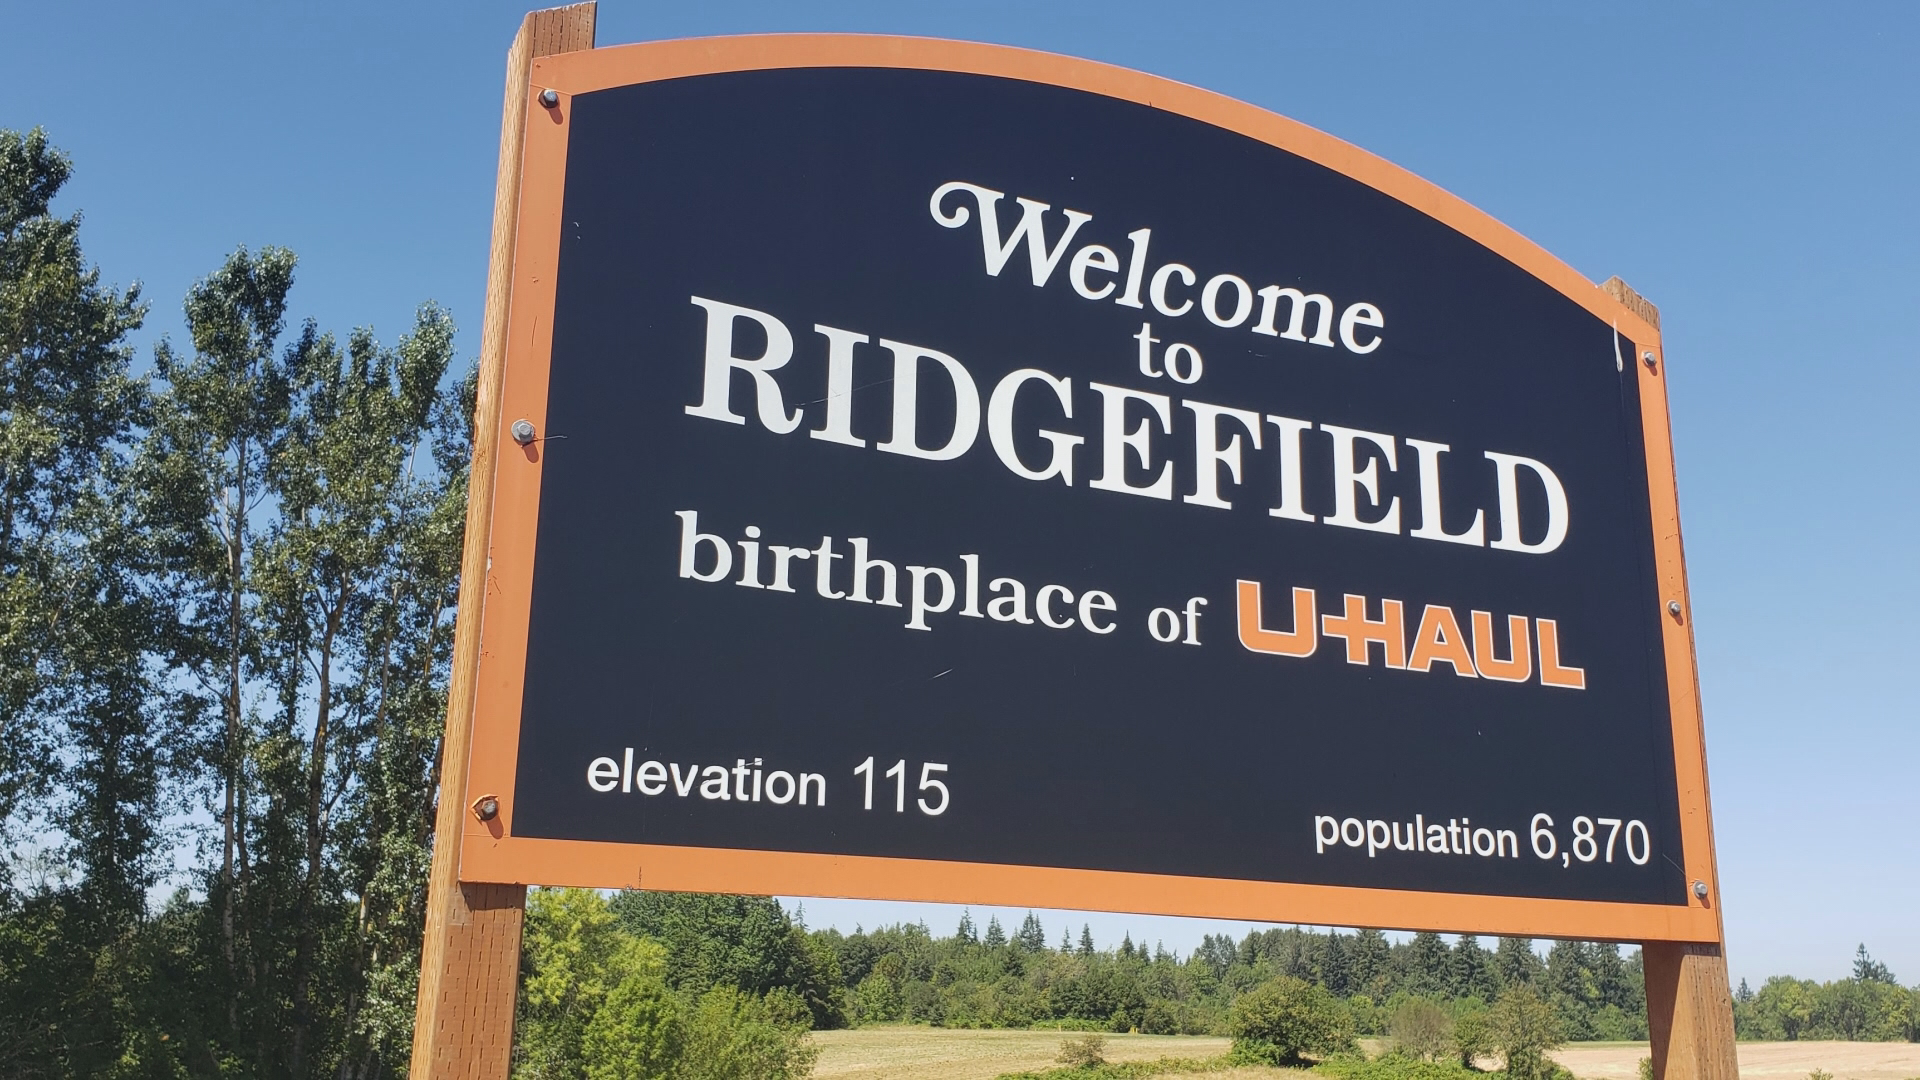 In the latest episode of Rod on the Road, KGW Sunrise meteorologist Rod Hill visited Ridgefield, Washington. The city's population has exploded in the past decade.